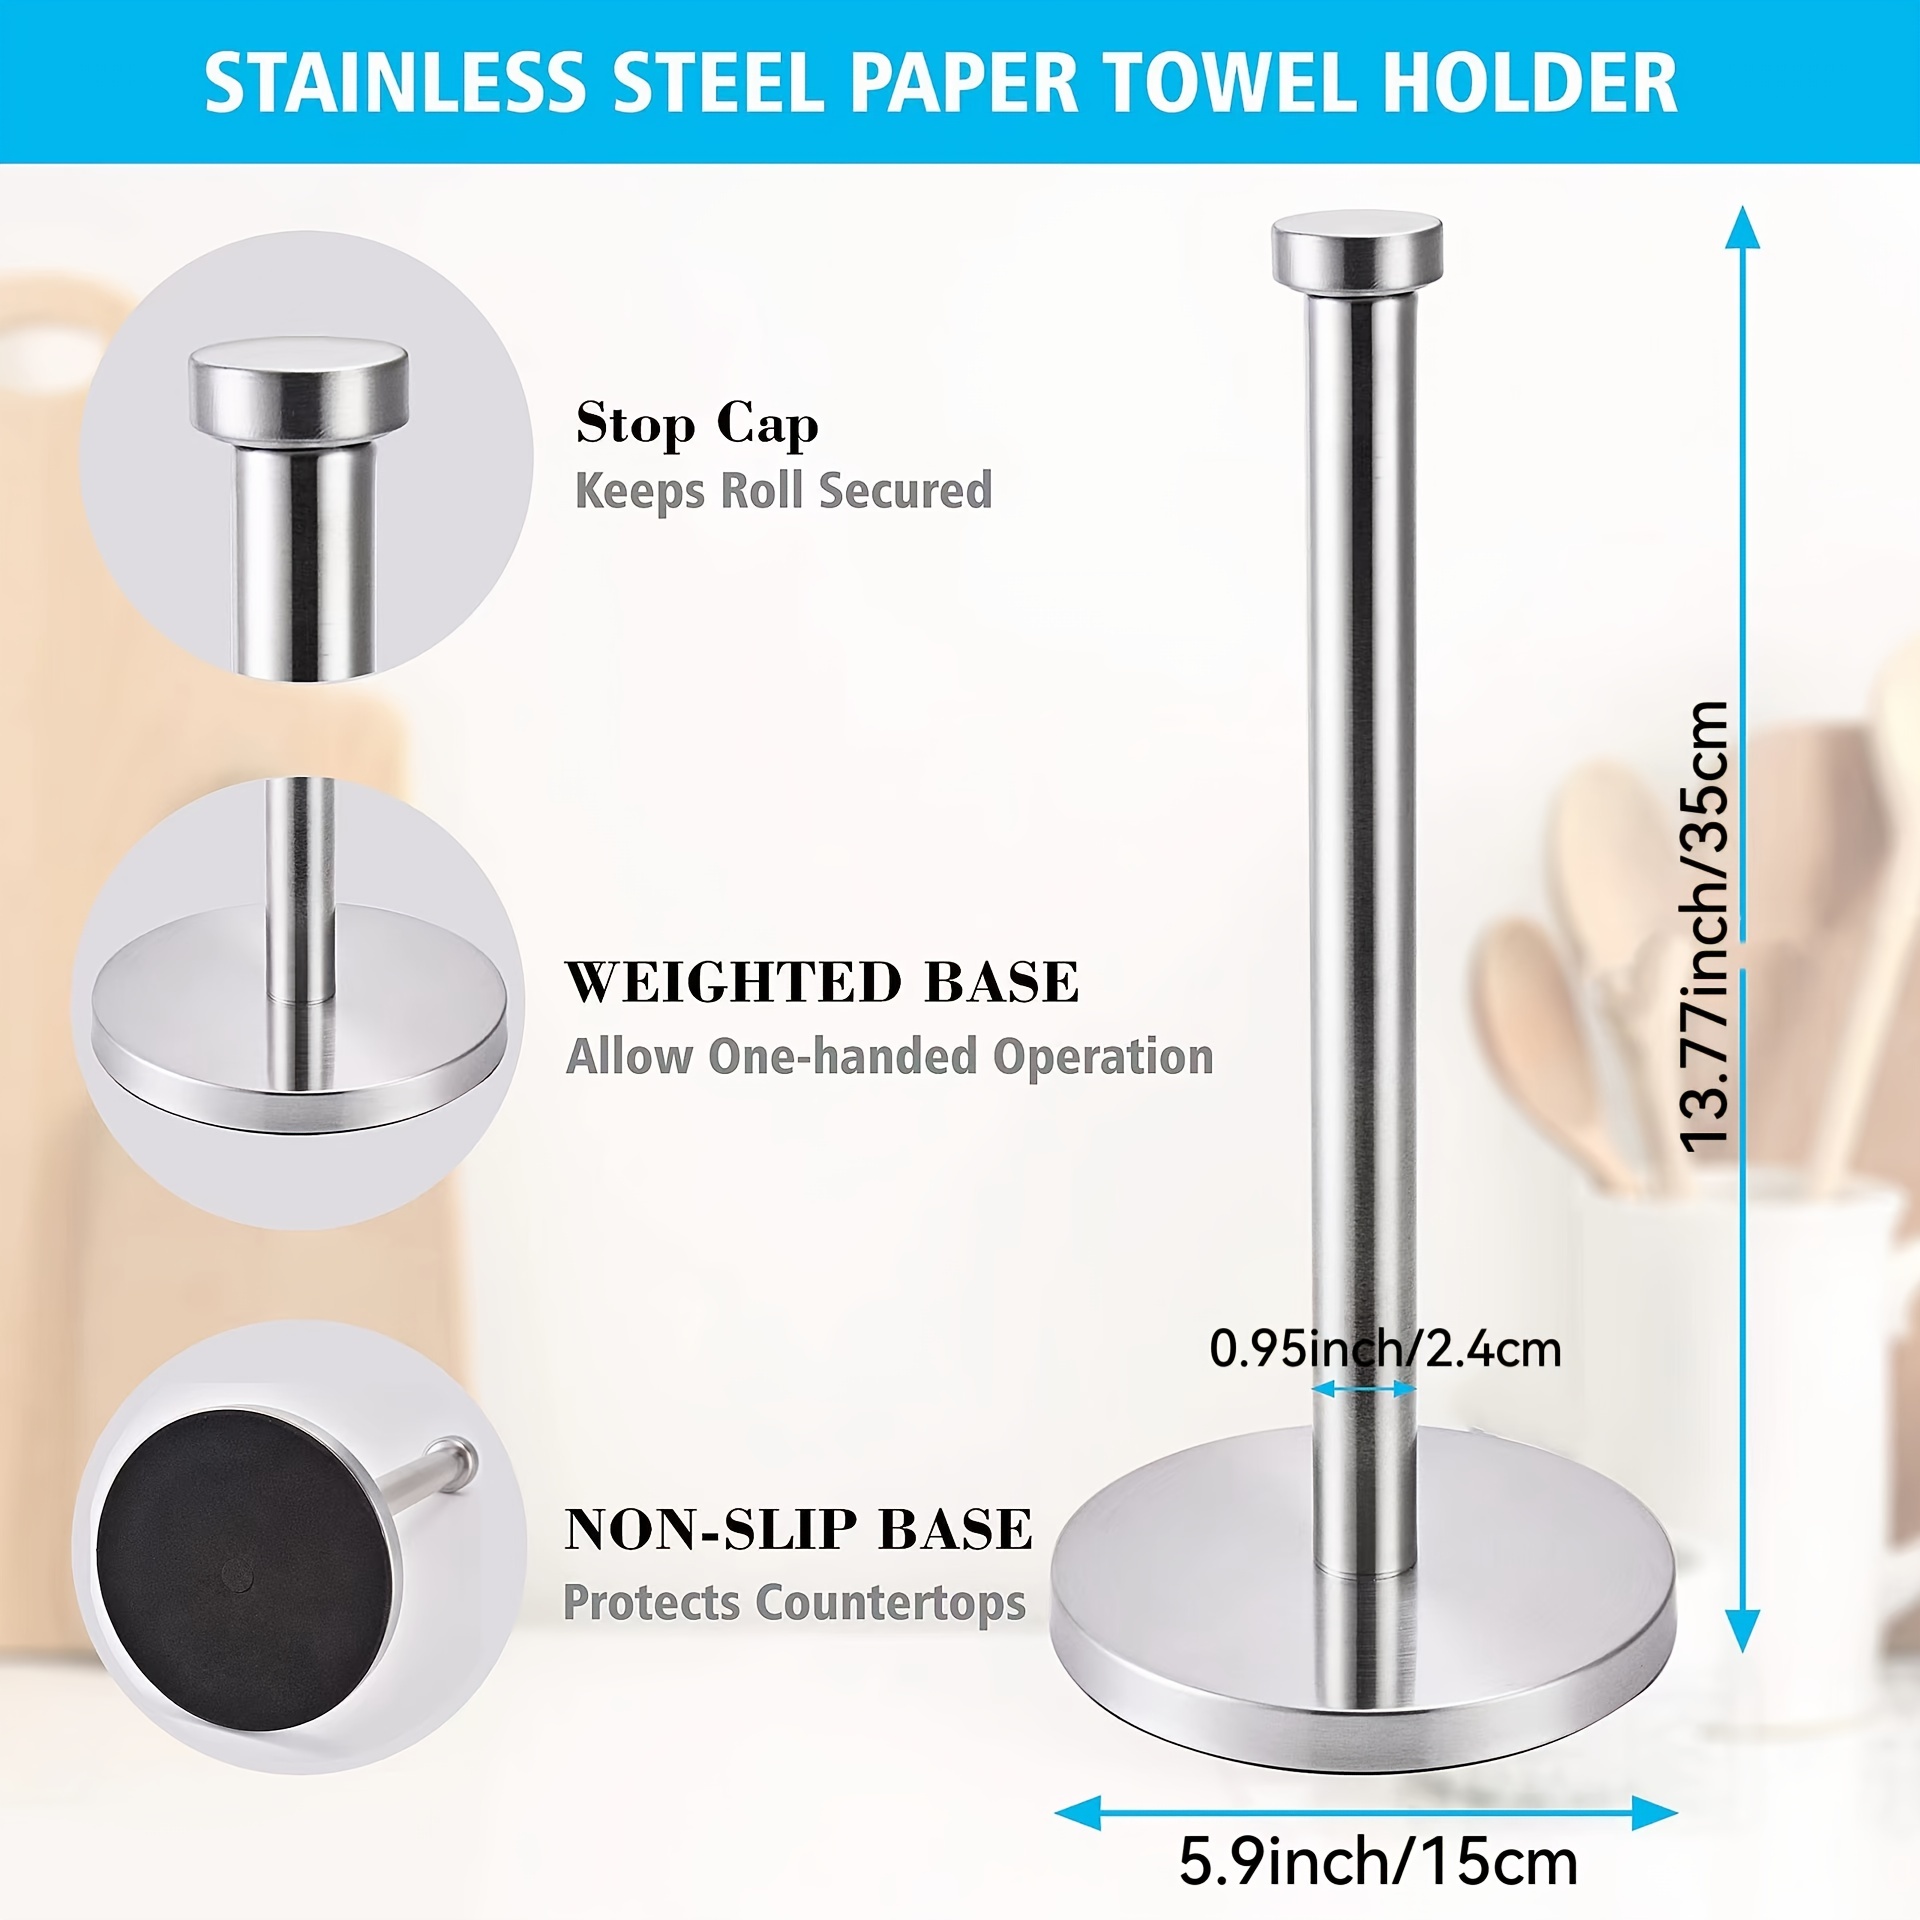 Andover Mills™ Stainless Steel Free-standing Paper Towel Holder & Reviews